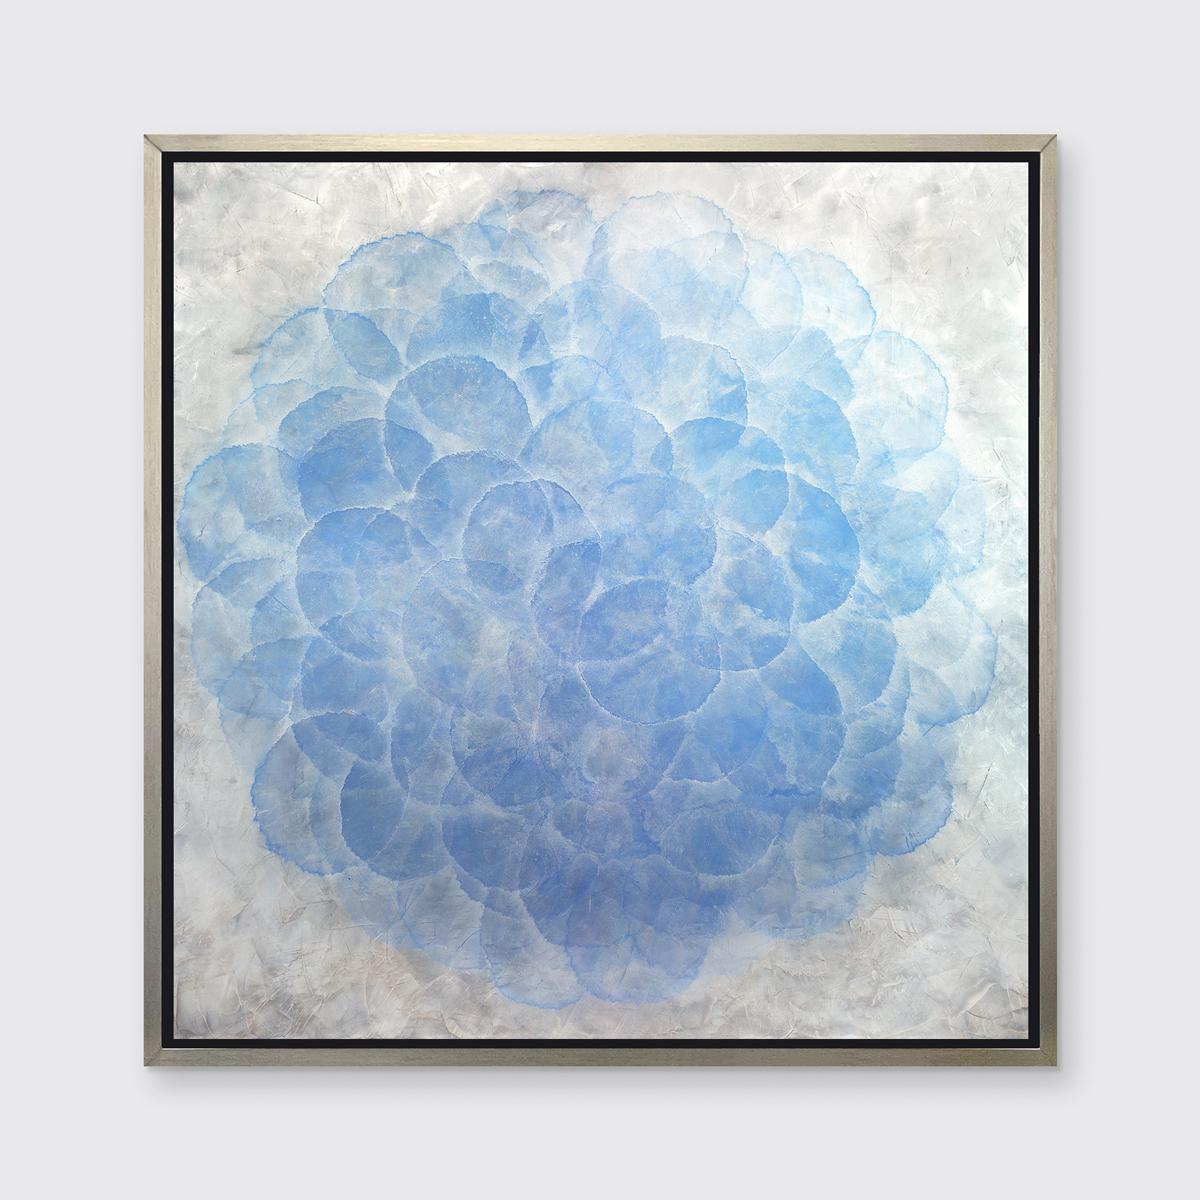 Roger Mudre Abstract Print - "Dichondra, " Framed Limited Edition Giclee Print, 36" x 36"